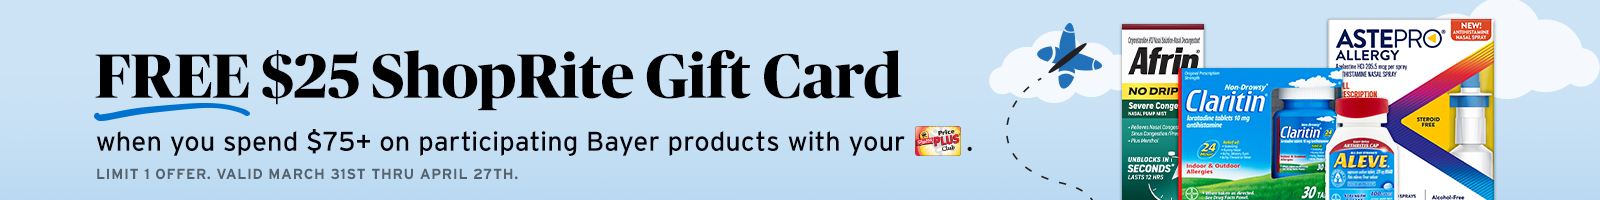 Free $25 gift card when you spend $75 or more on bayer products